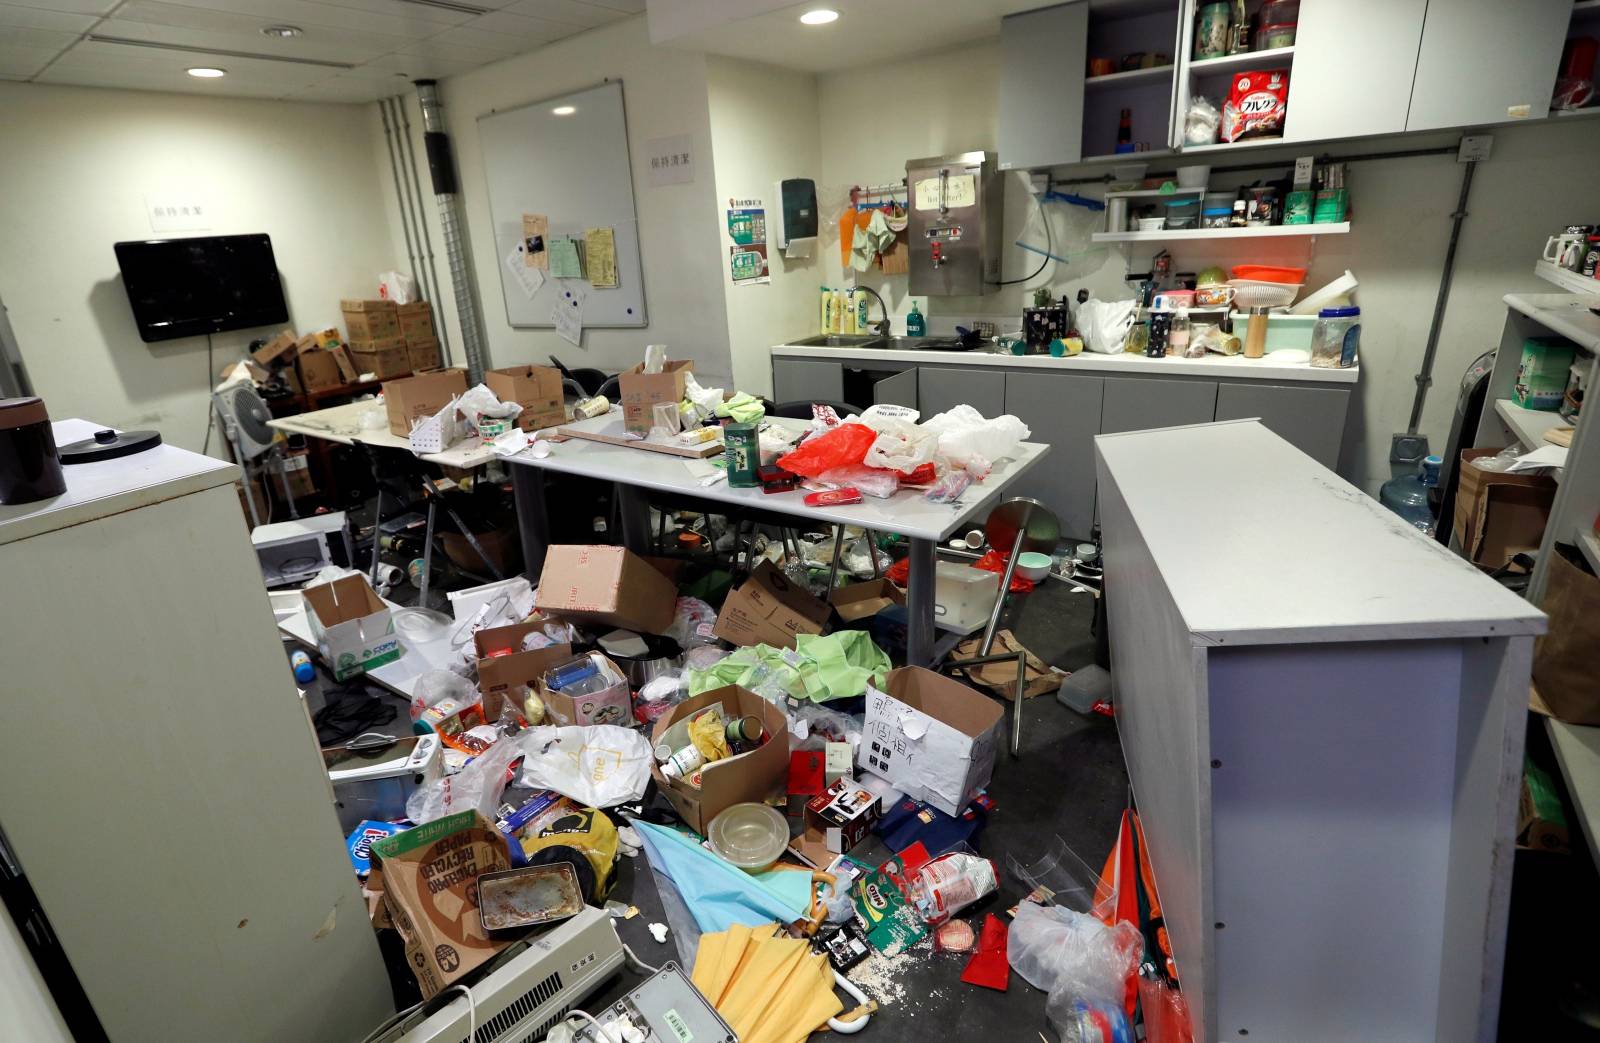 A view shows damages inside the Legislative Council building after protesters stormed it in Hong Kong